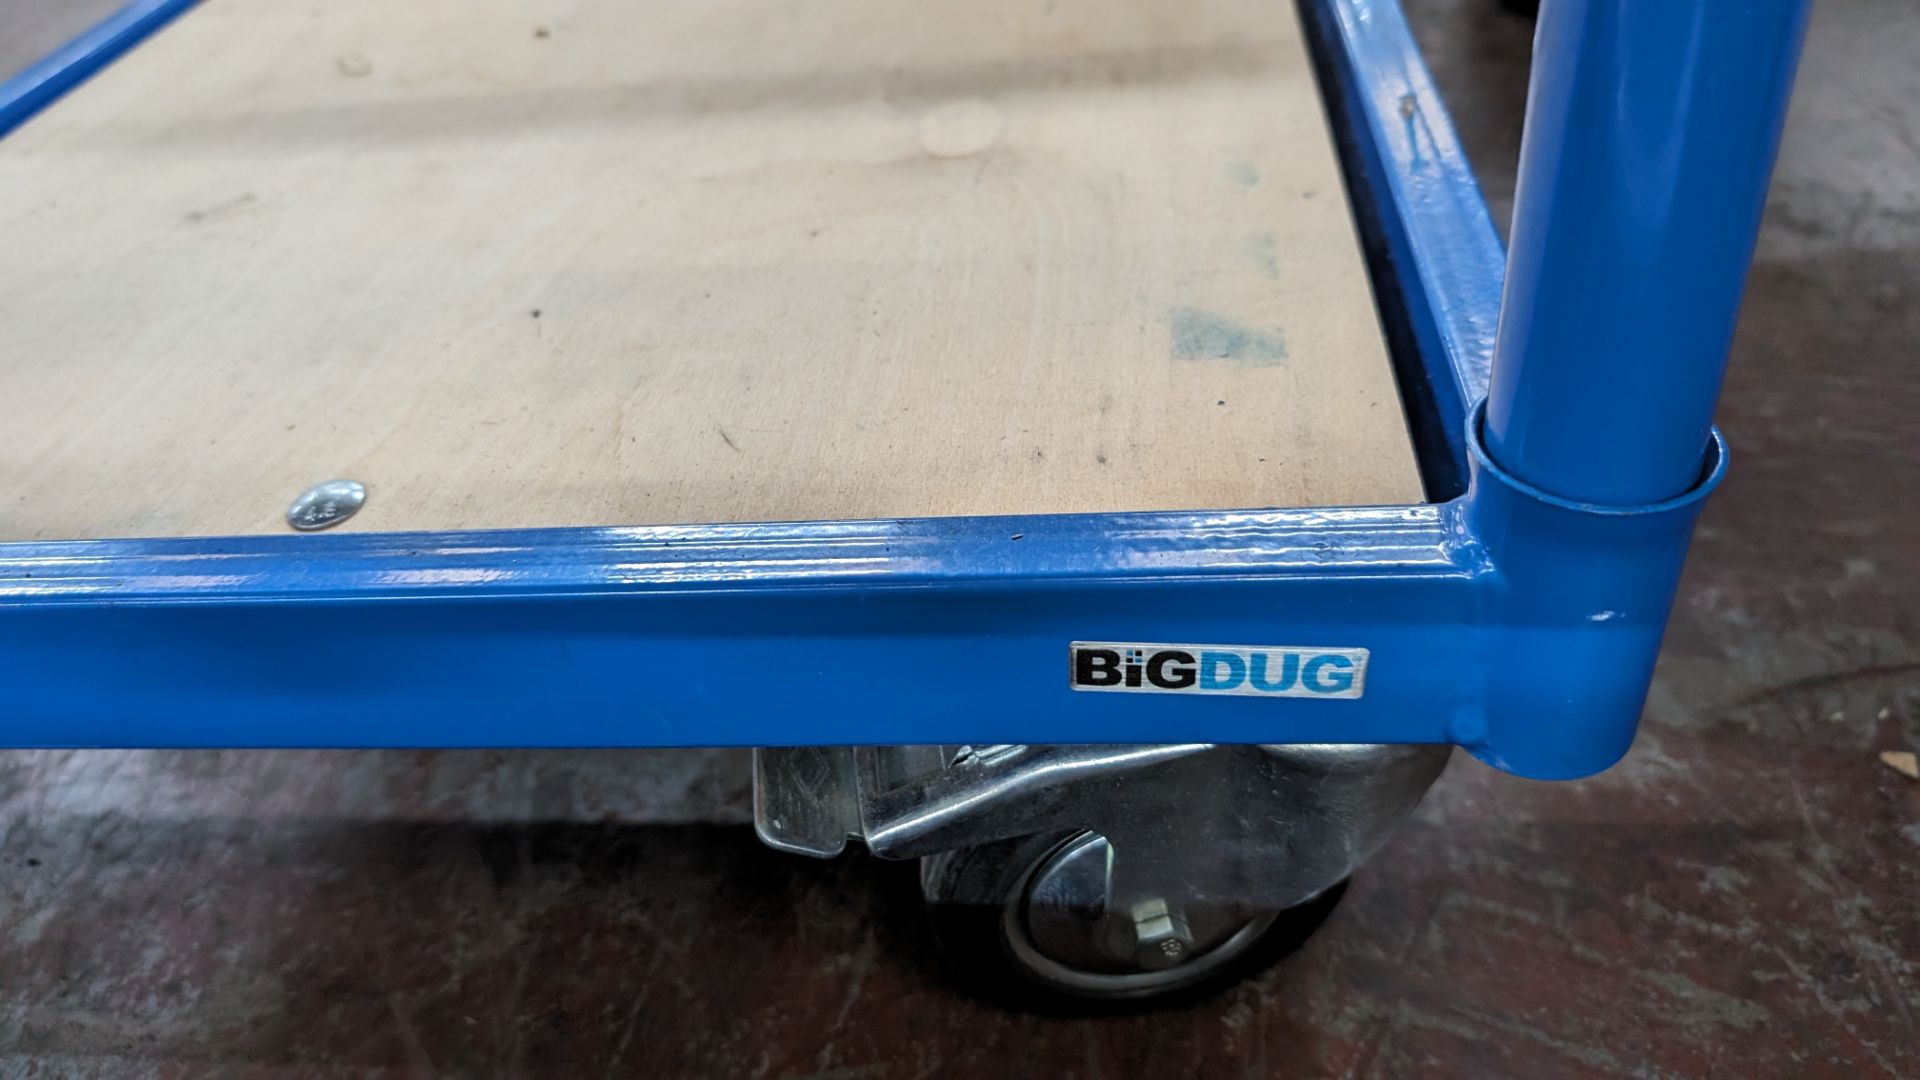 BigDug heavy duty metal platform trolley with braked wheels and removeable handle which can be attac - Image 4 of 4